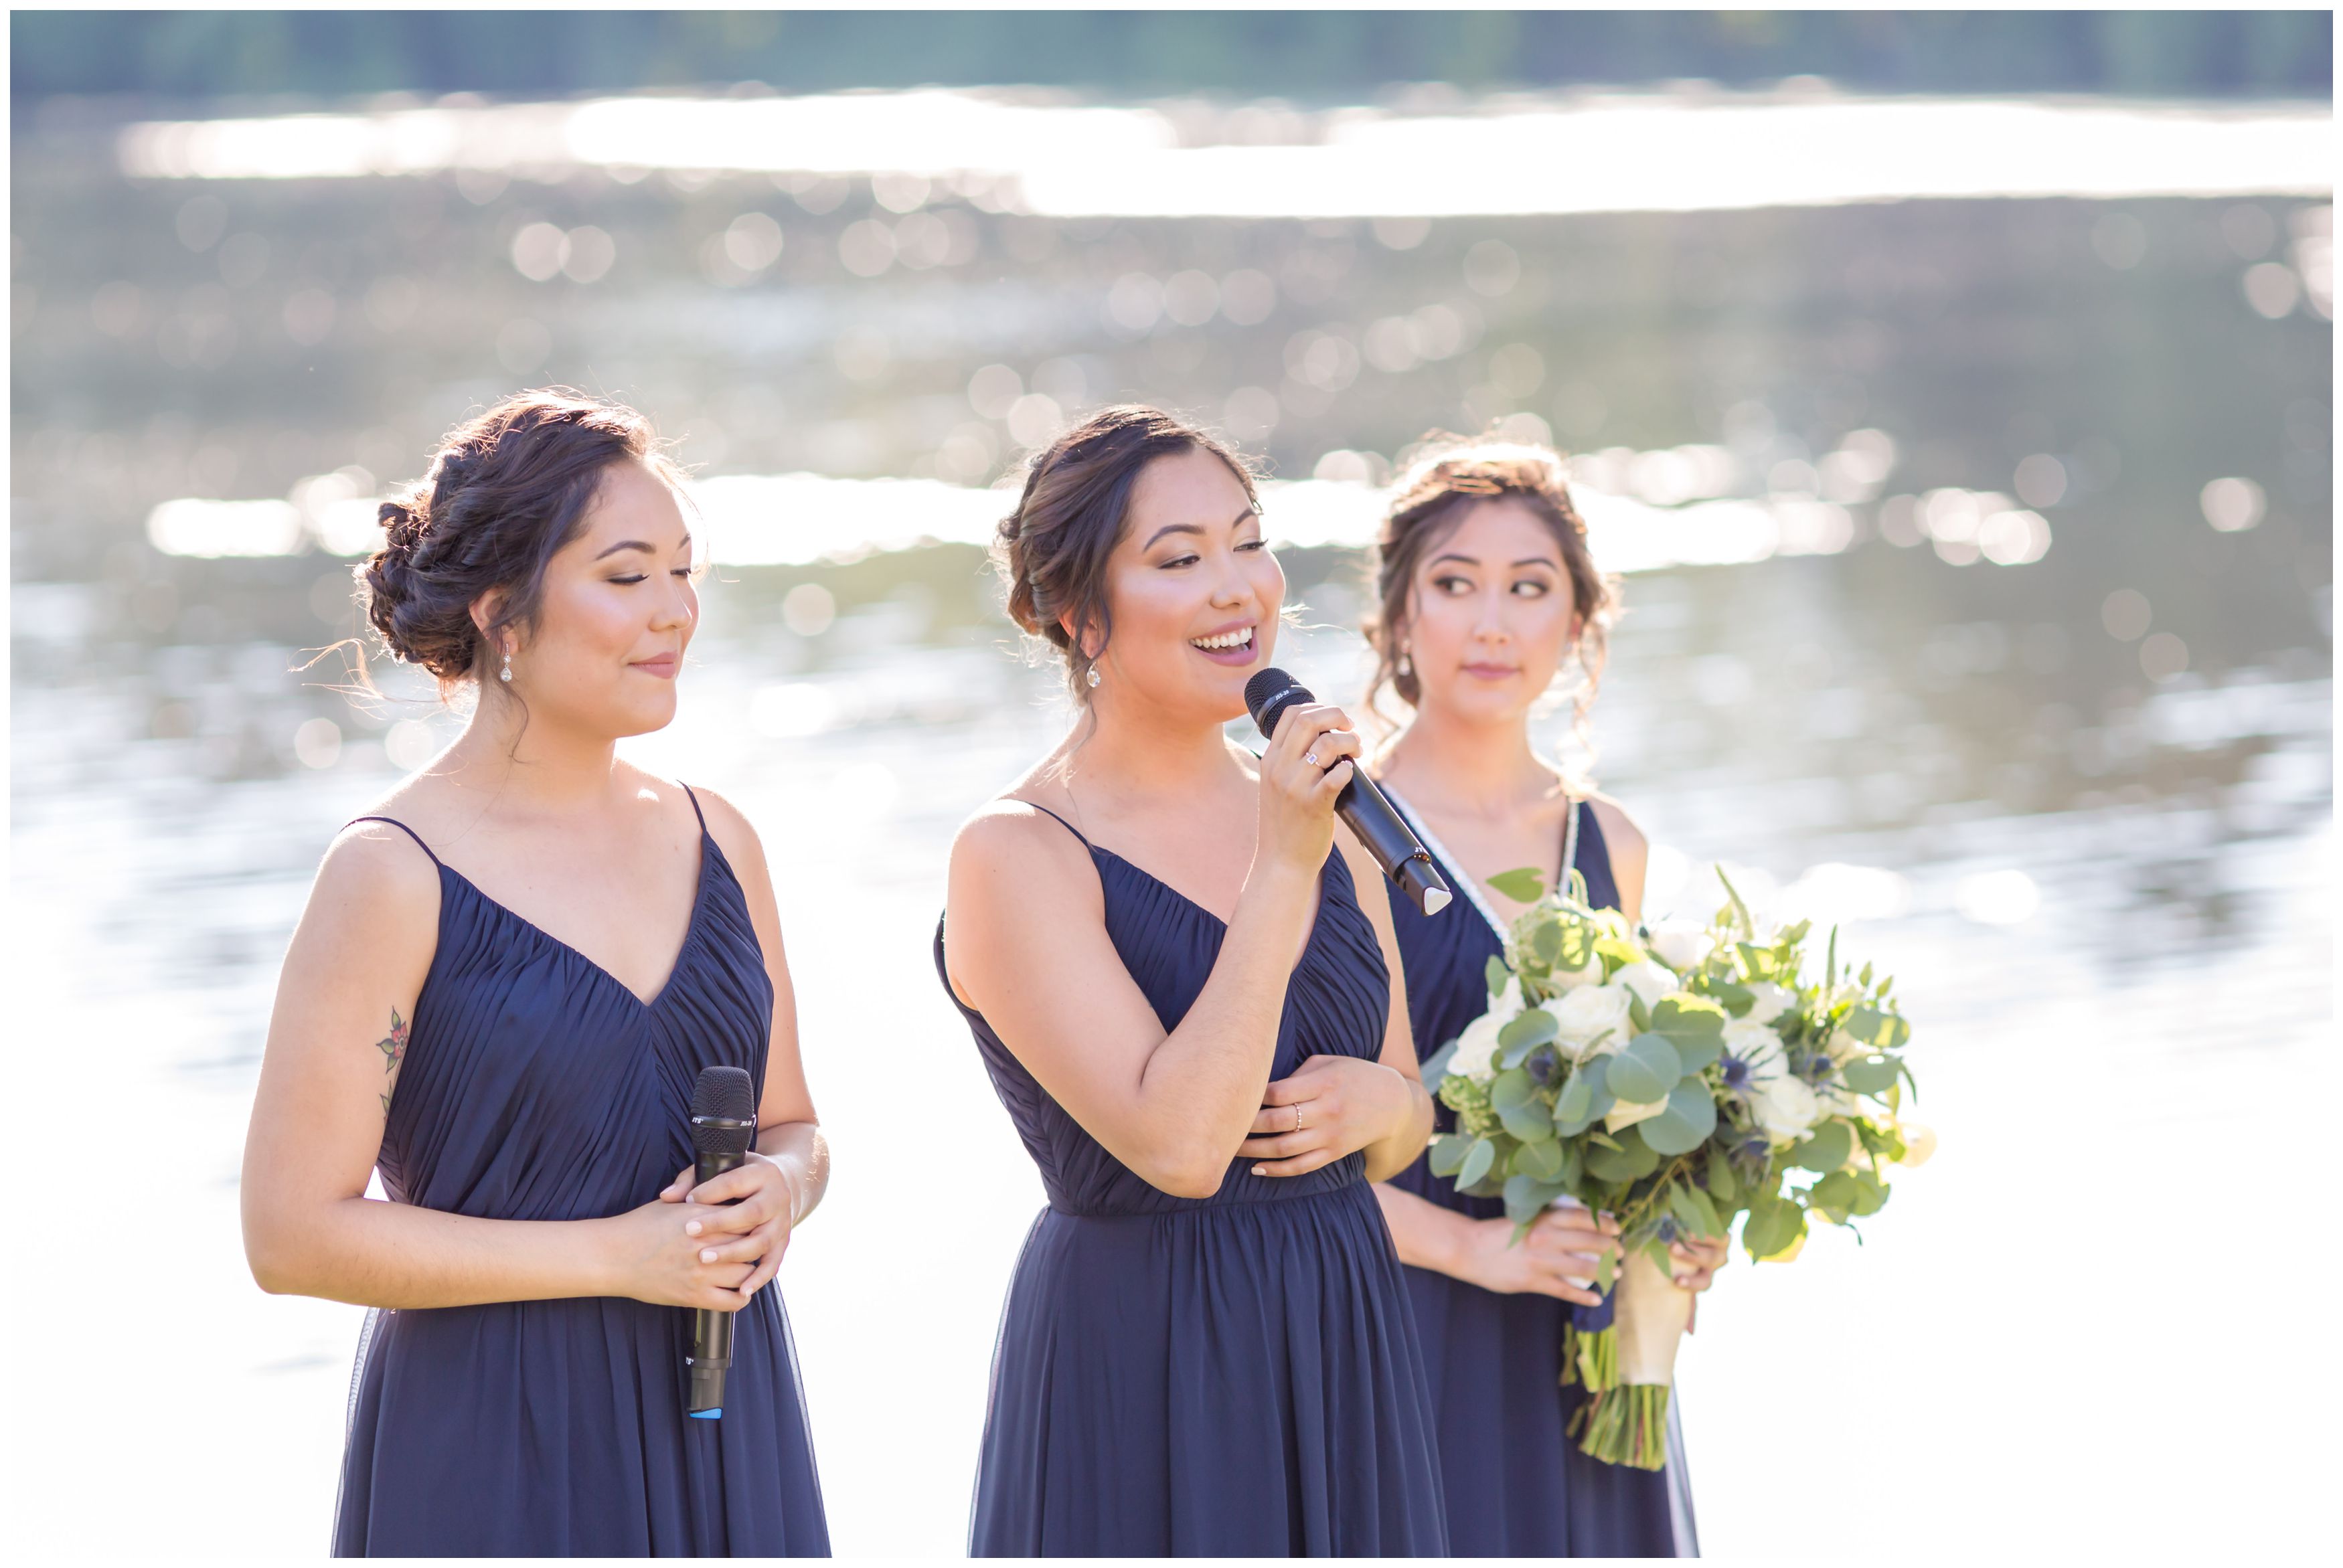 Sisters singing at outdoor lakeside ceremony